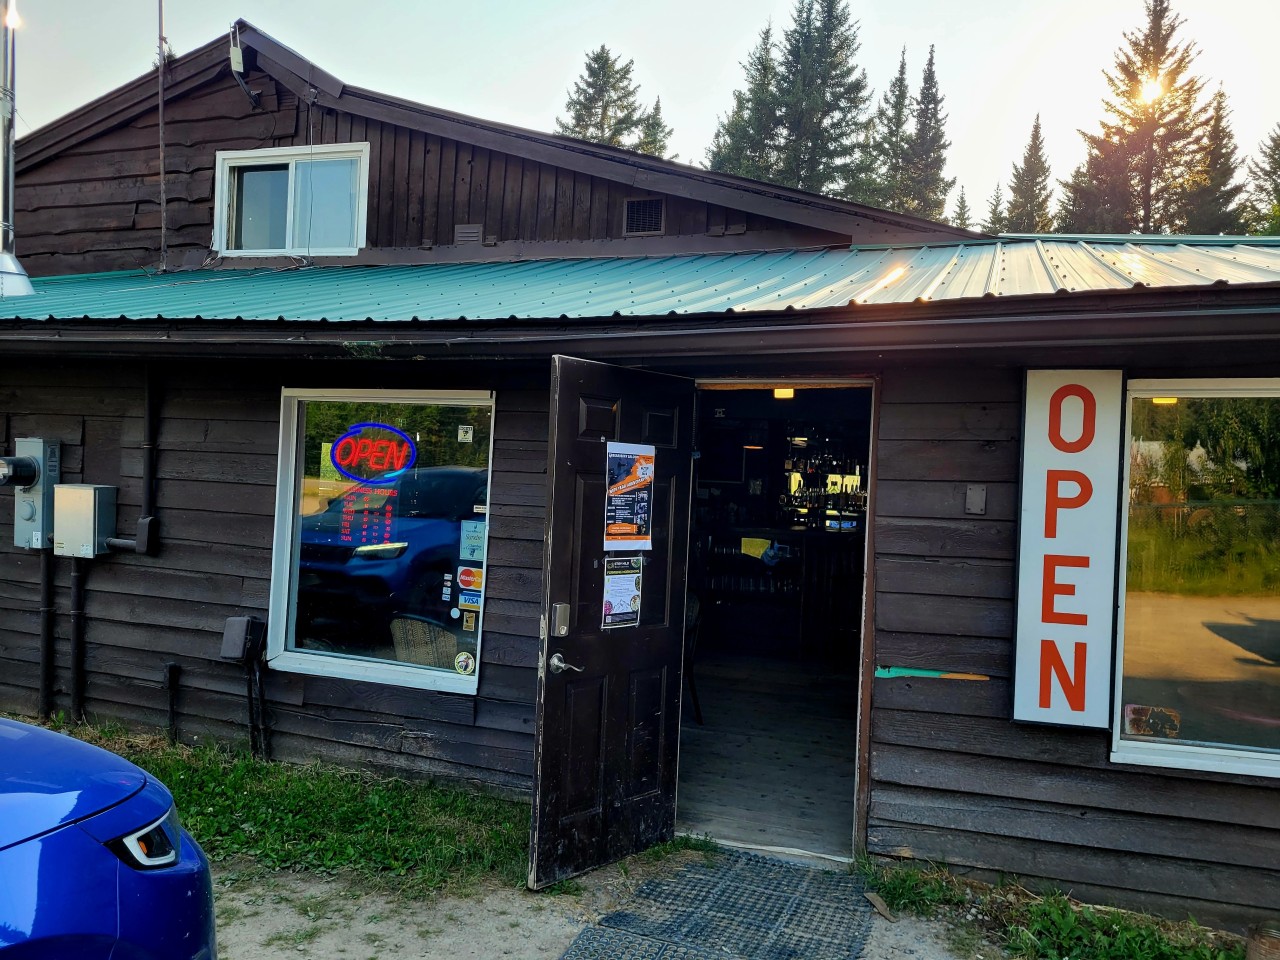 100 Year Old Bearberry Saloon Building - Sundre Alberta Canada - The log cabin that is home to the Bearberry Saloon was built in the early 1920s and has been serving patrons for over 80 years. Put the Bearberry Saloon on your destination list when visiting the Sundre, Alberta area.